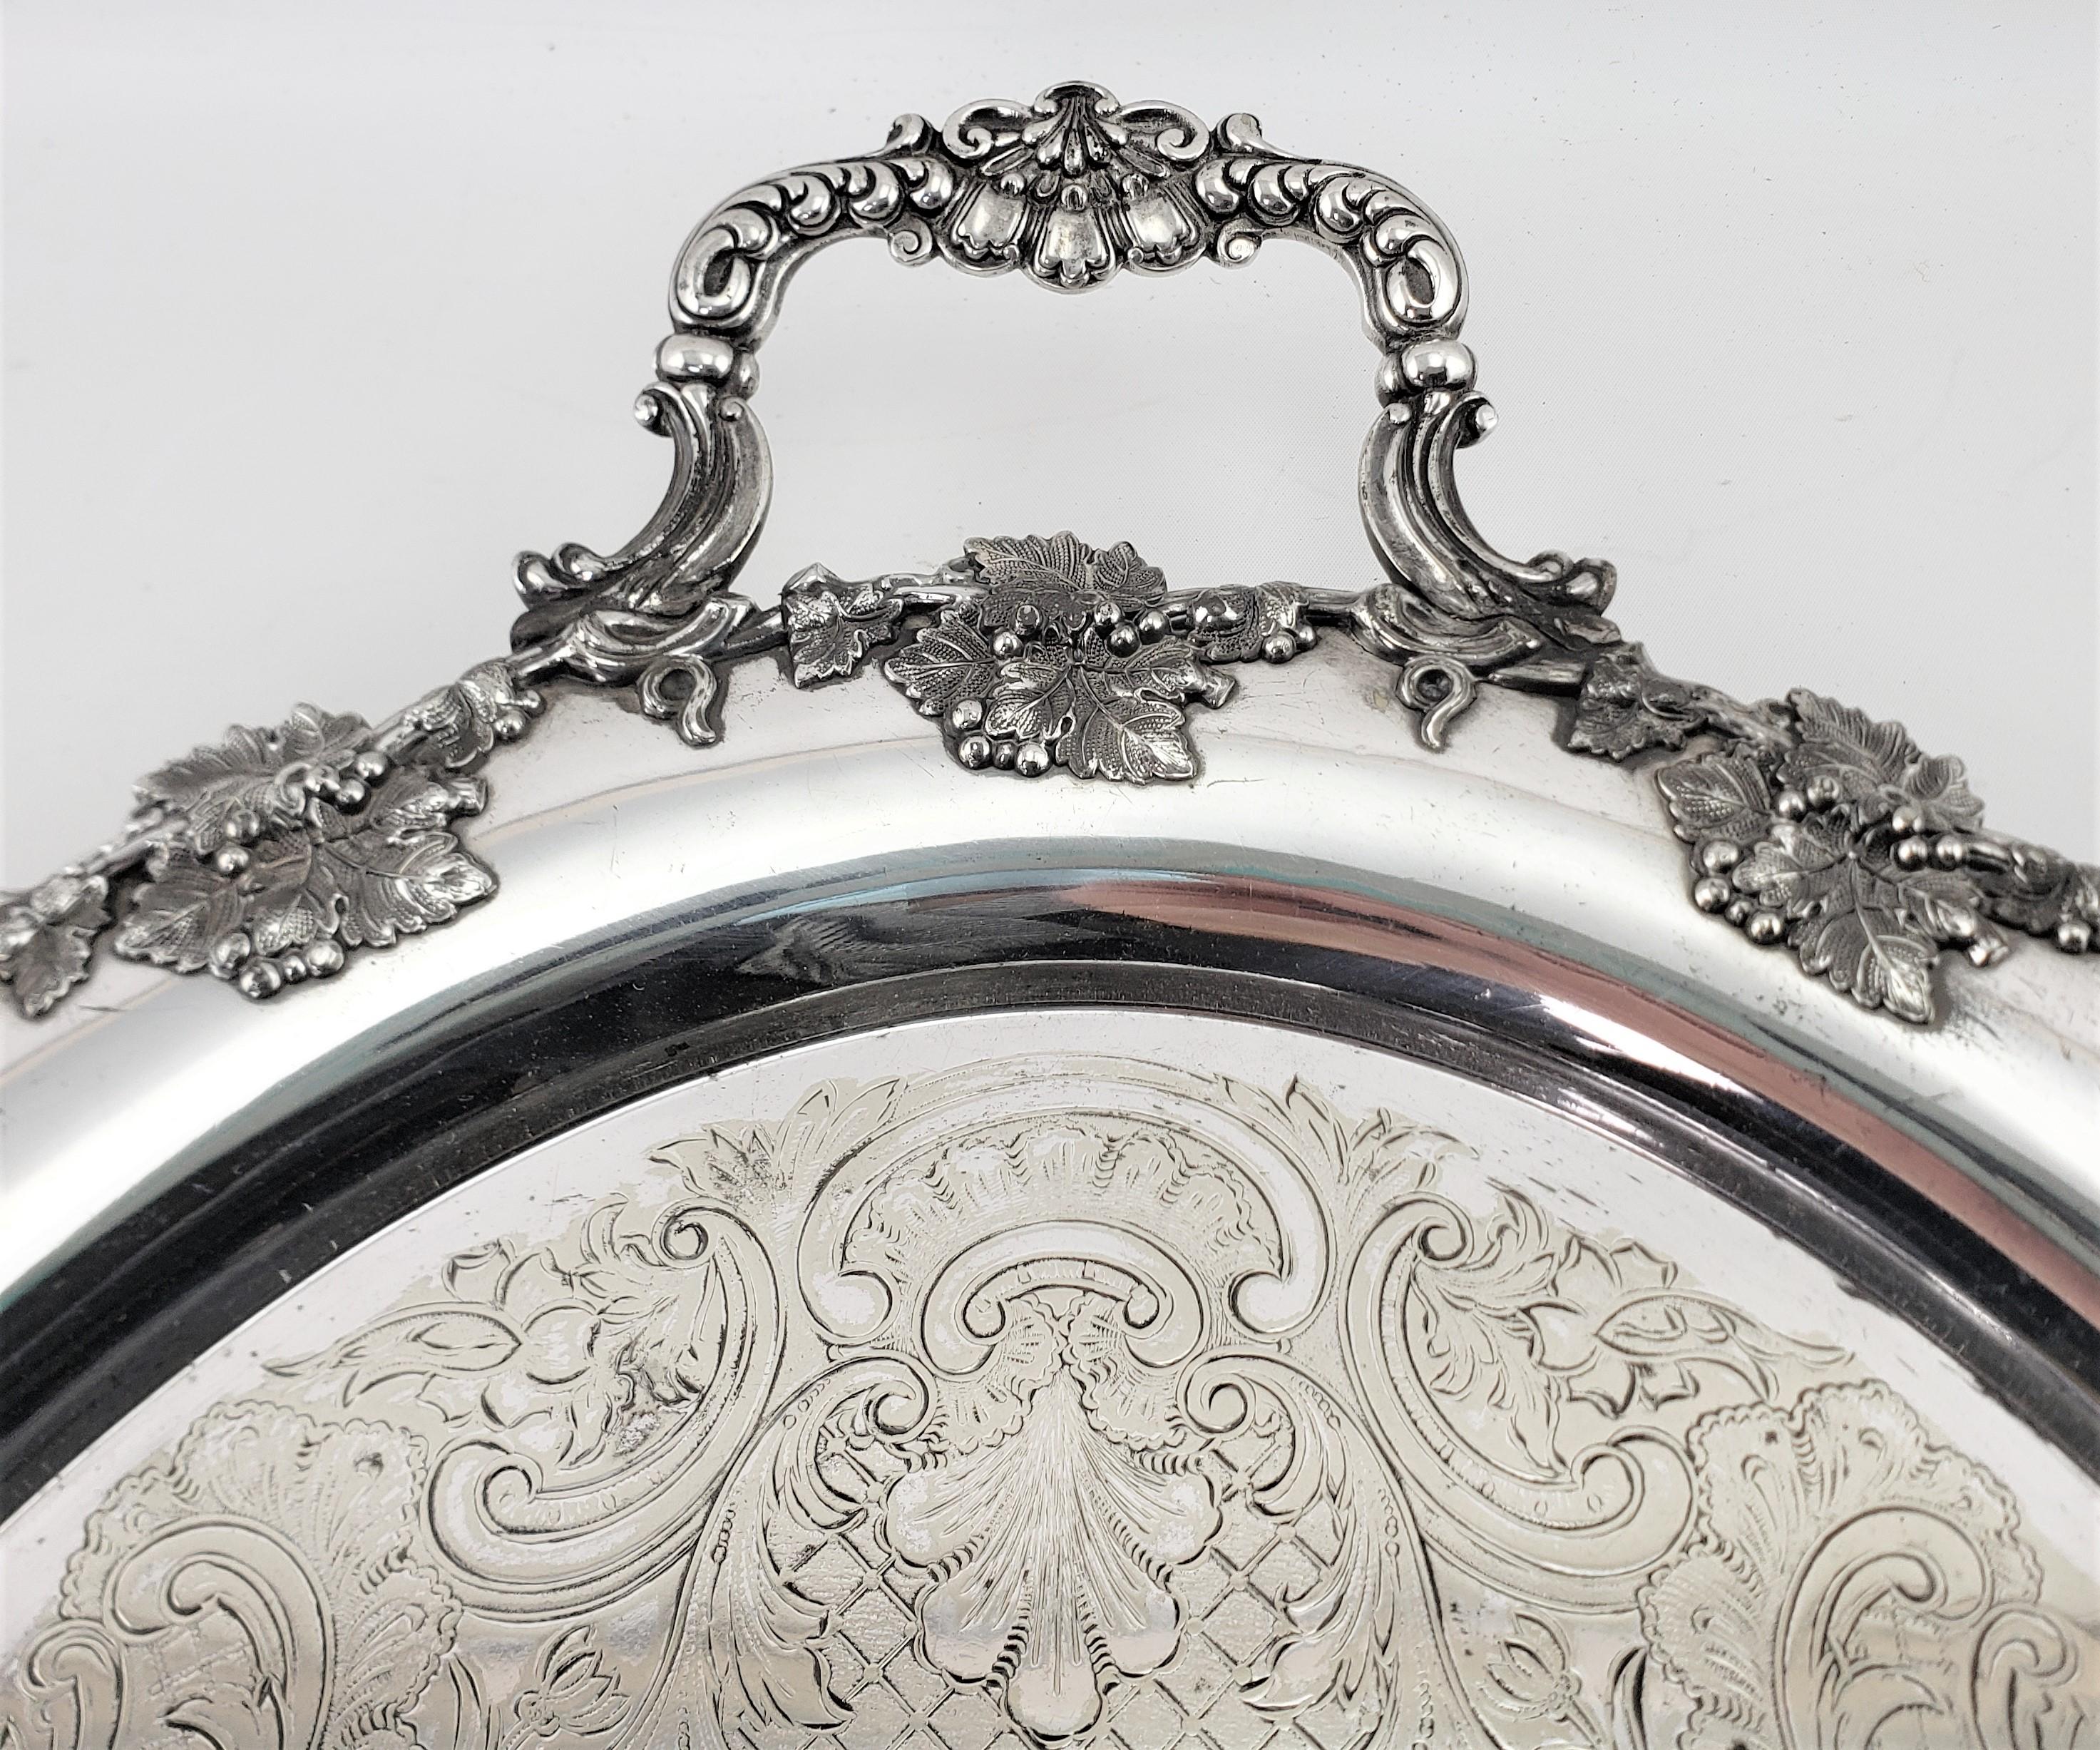 20th Century Large Antique Barker-Ellis Silver Plated Serving Tray with Berry & Leaf Decor